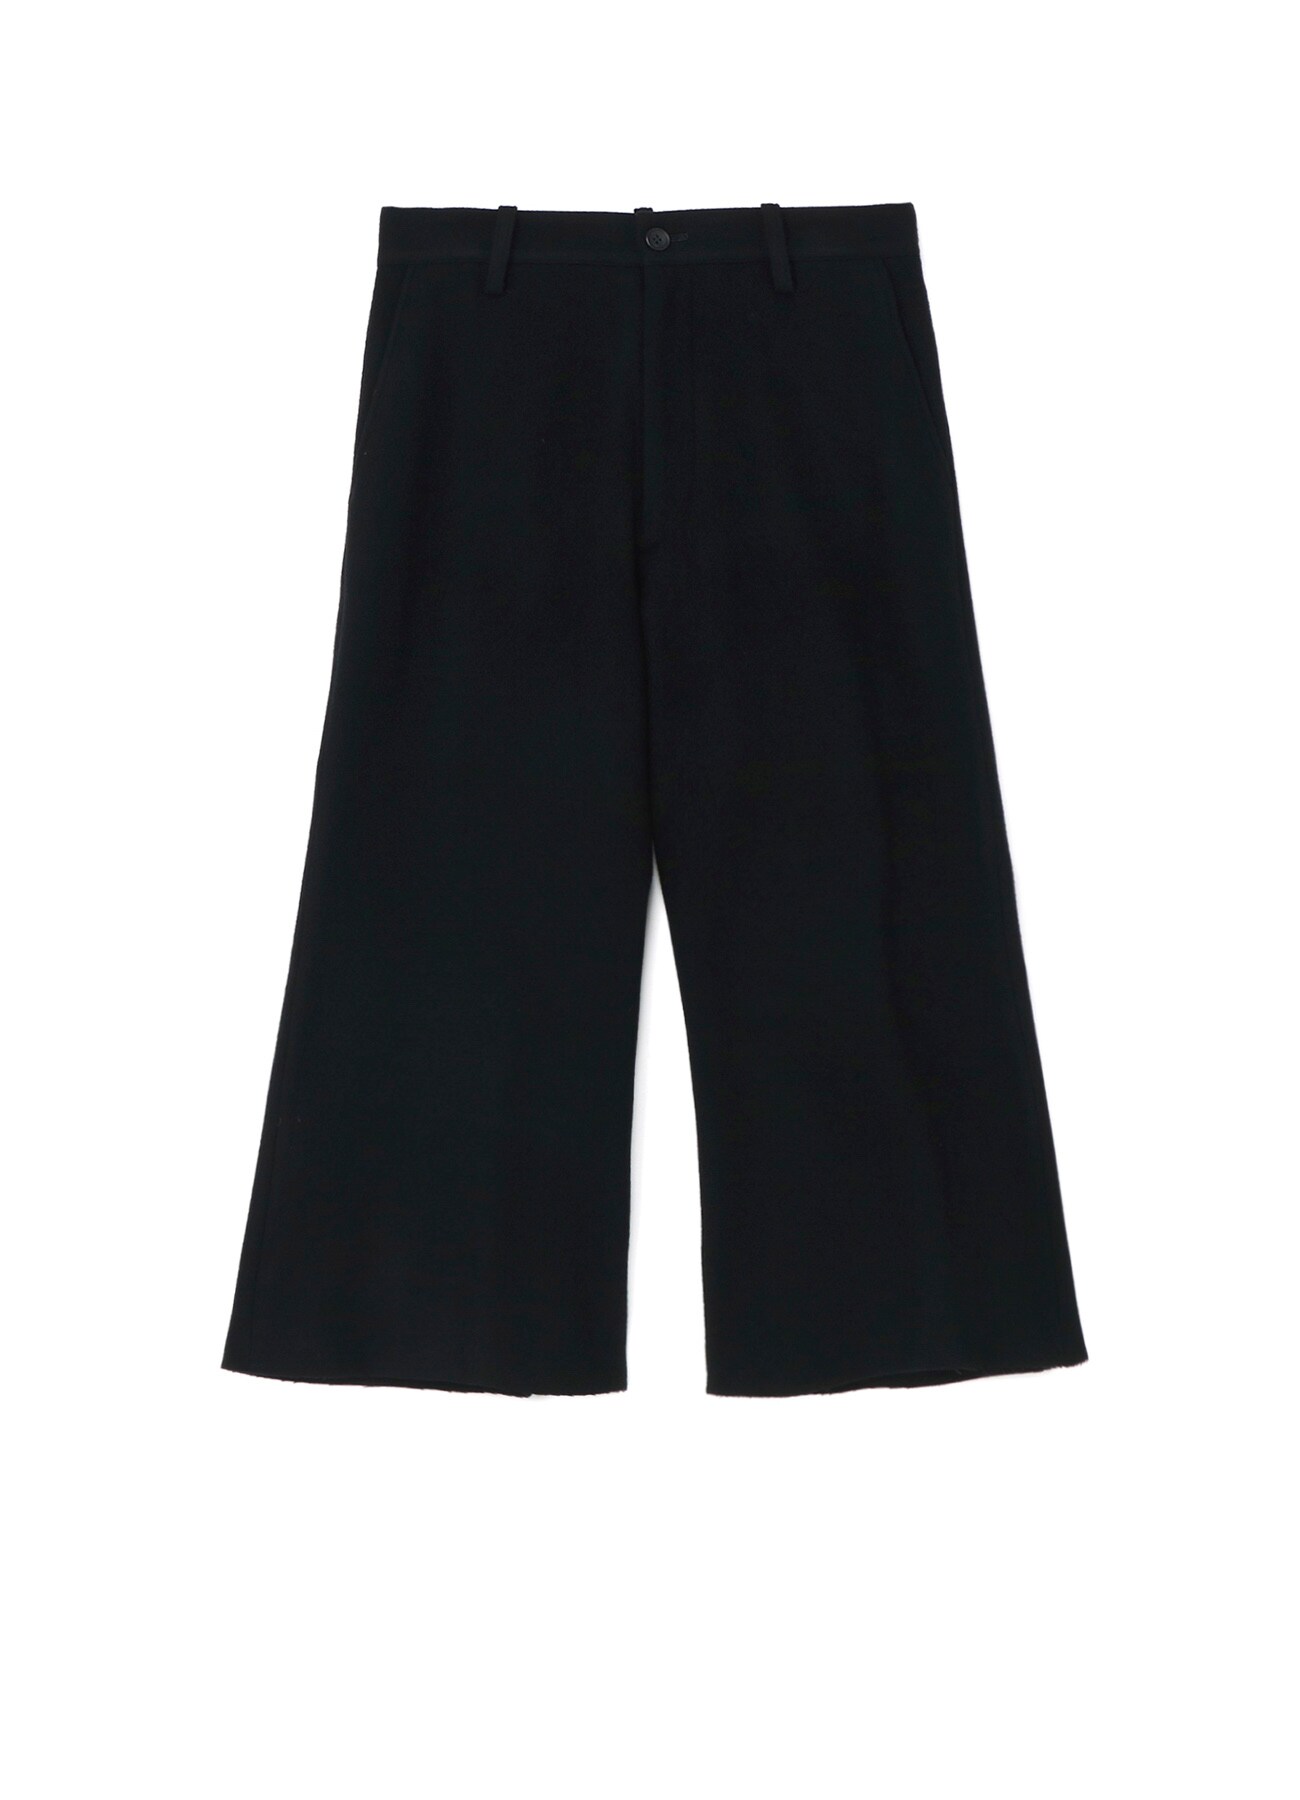 AIRY MOSSER FLARE PANTS